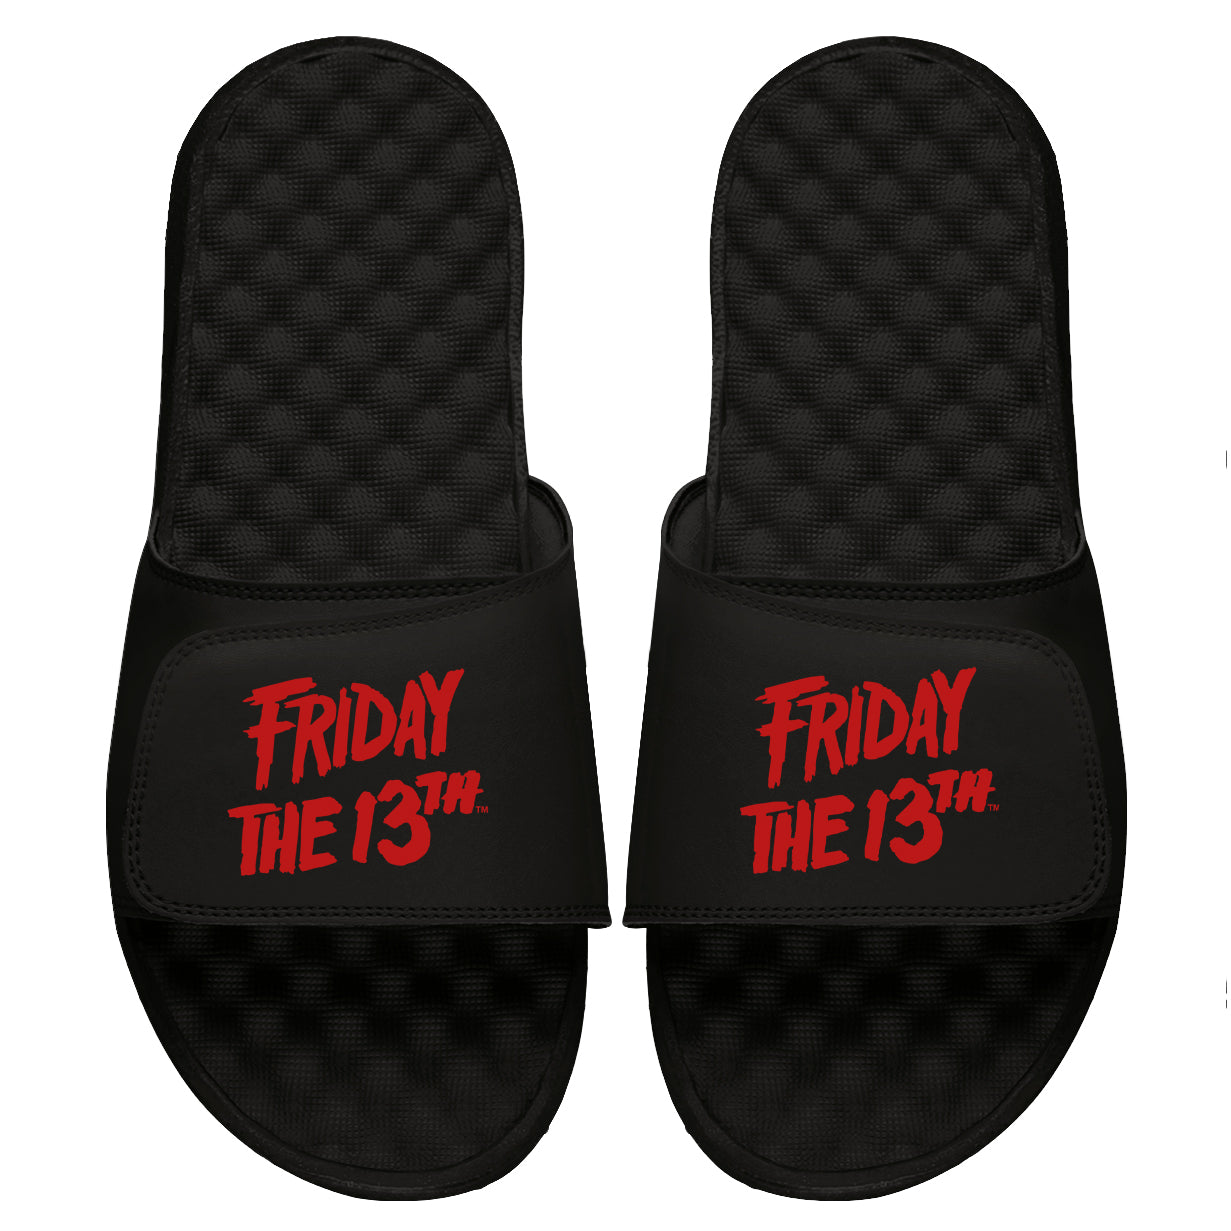 Friday The 13th: Classic Slides